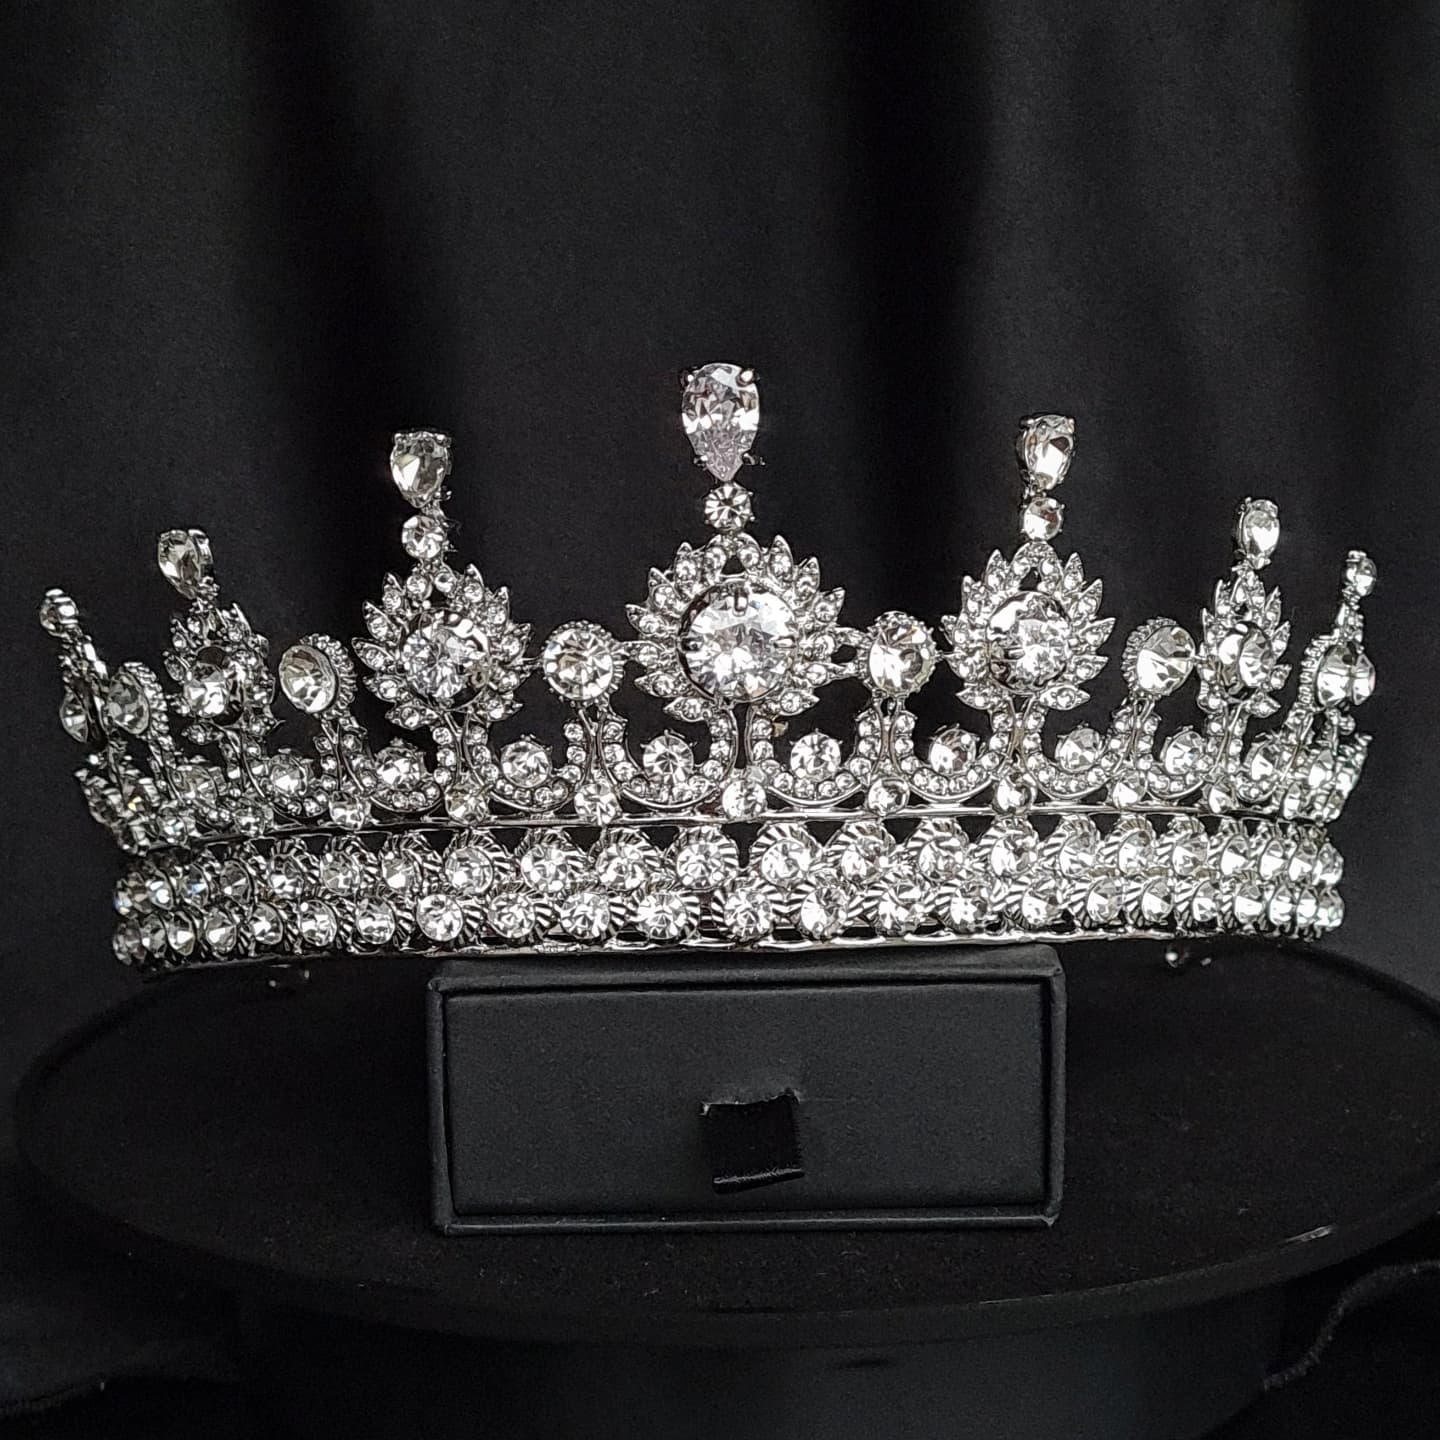 A close-up of a tiara with rhinestones on a black background. The tiara is made of silver and features a delicate design with cascading rhinestones. The rhinestones are clear and sparkling.